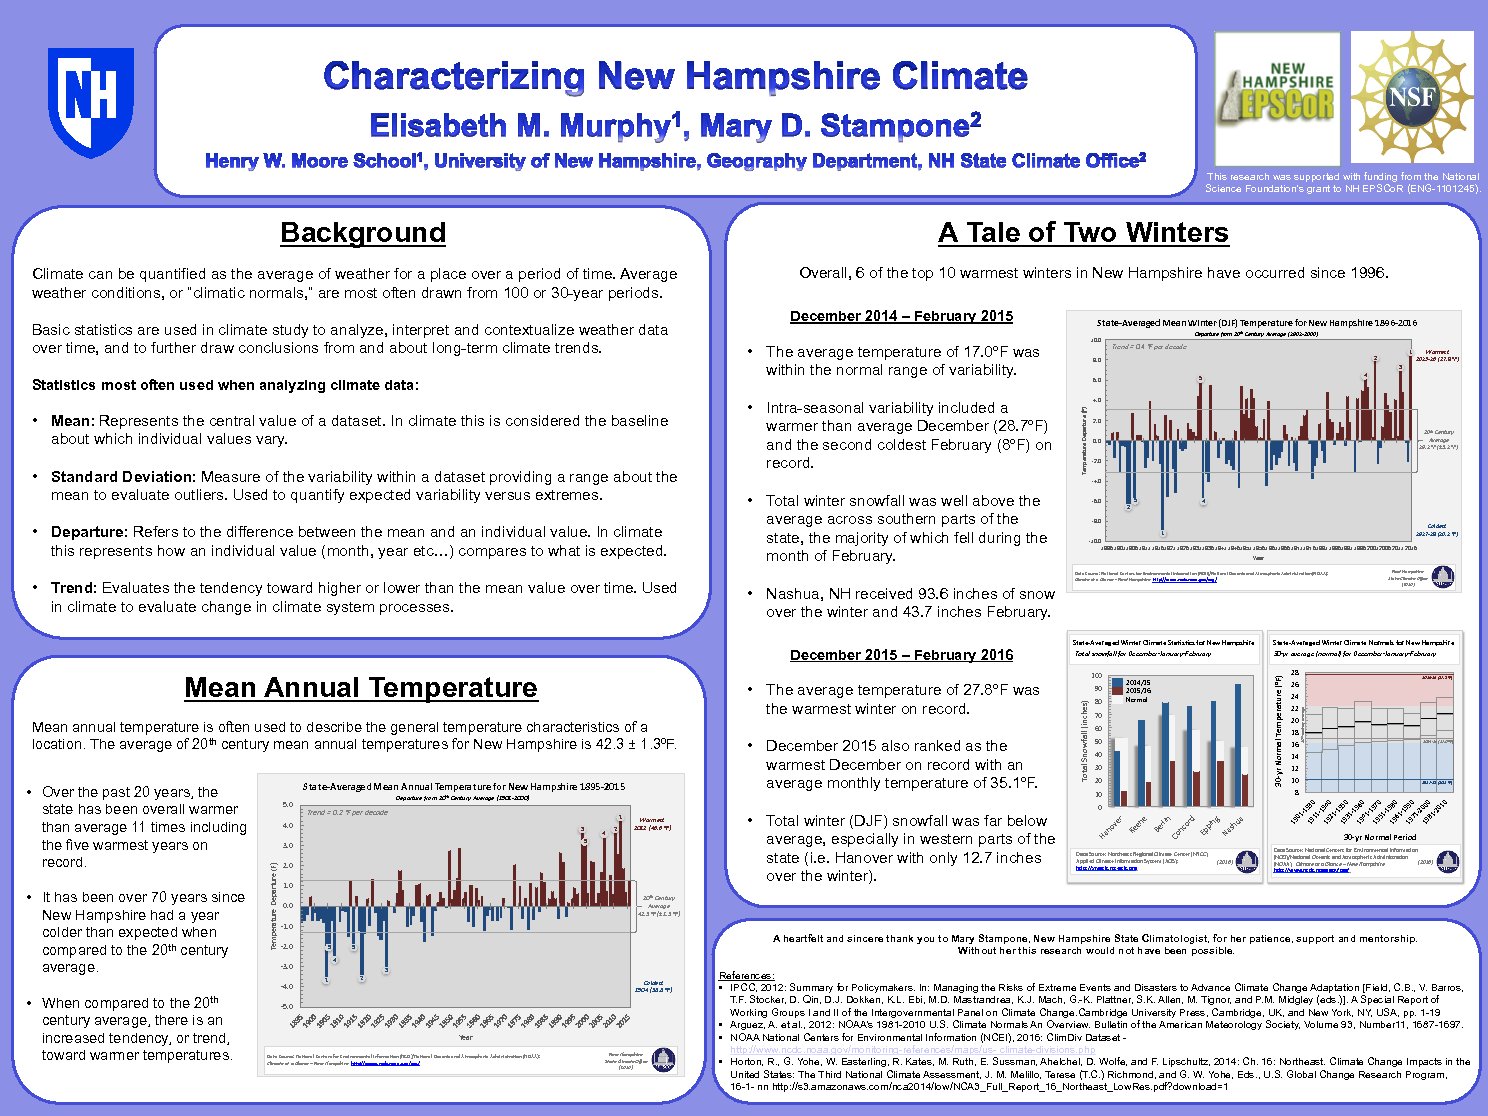 Characterizing New Hampshire Climate by emurphy